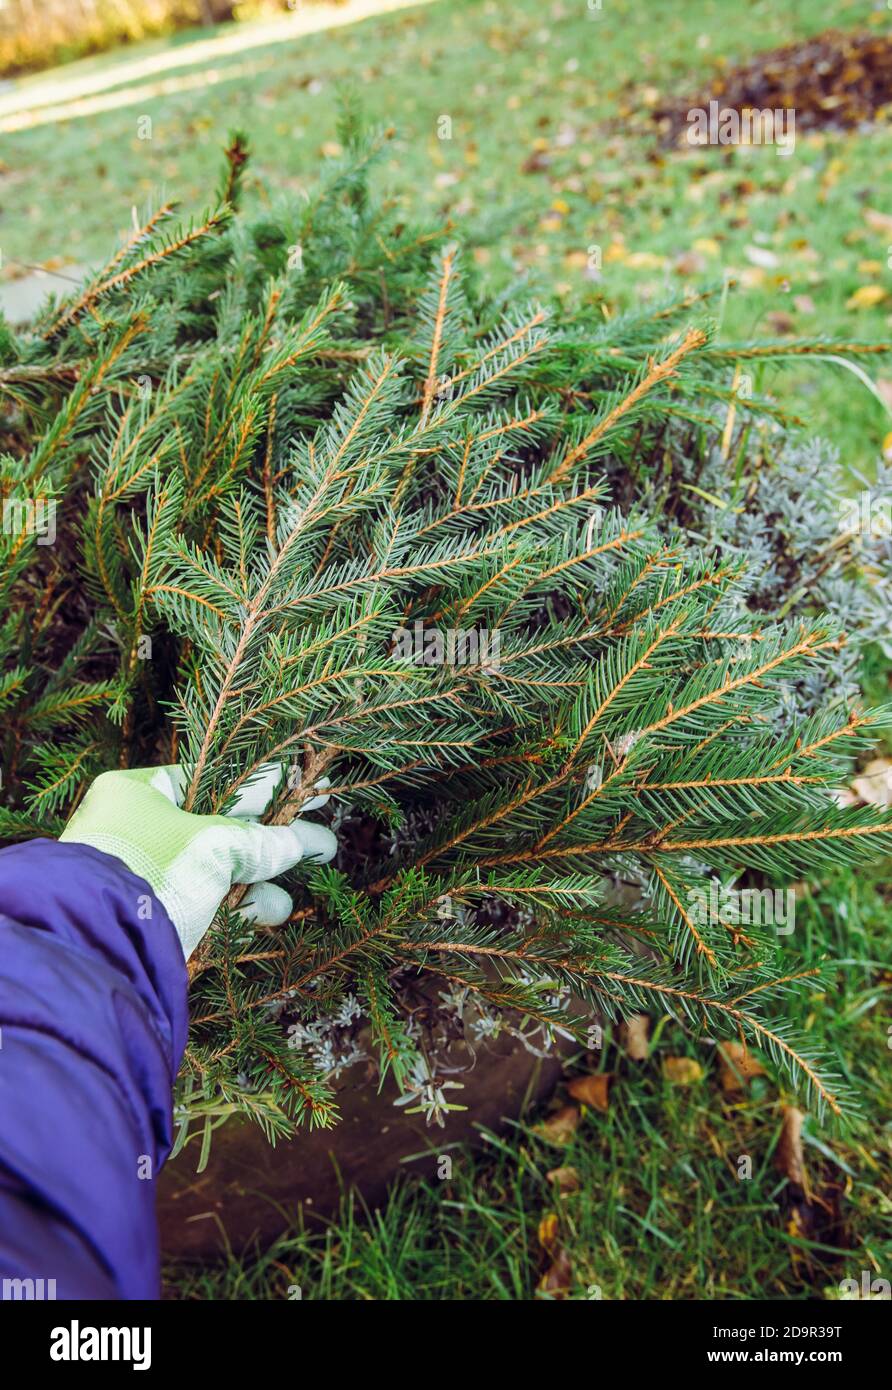 Winter cold damage prevention in home garden concept. Covering lavender flower bush with spruce tree branches so the plant will survive winter cold. Stock Photo